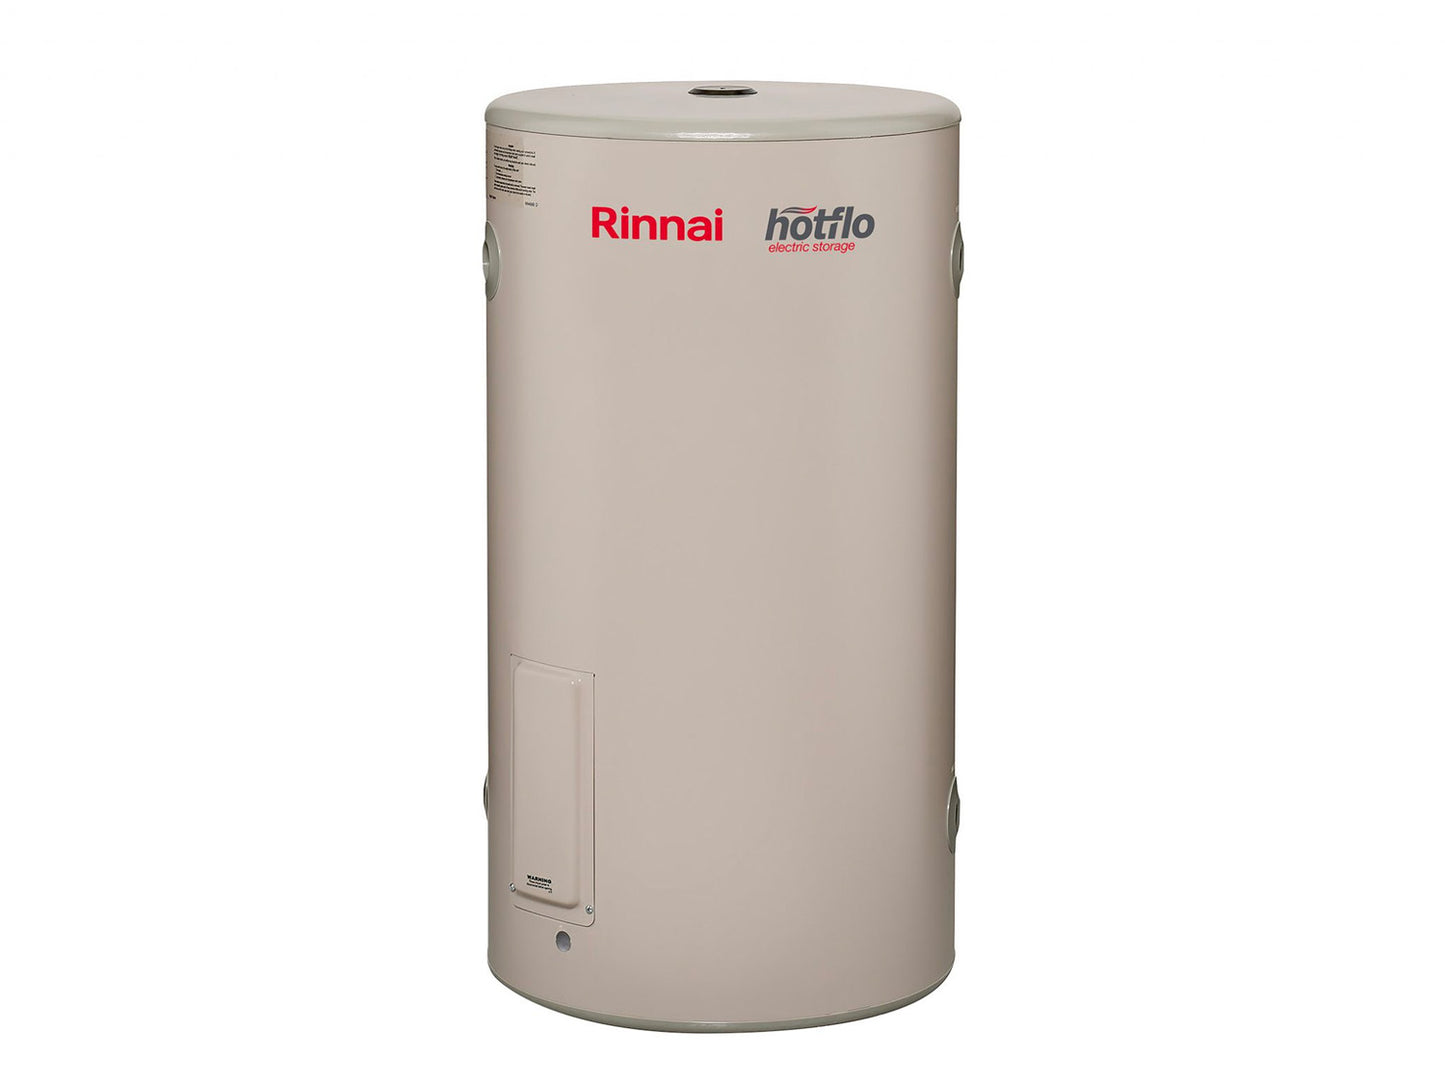 Rinnai EHFP80S36 Hotflo Plus 80L 3.6kW Electric Hot Water Storage Including Metro Perth Installation - Pacer Plumbing & Gas